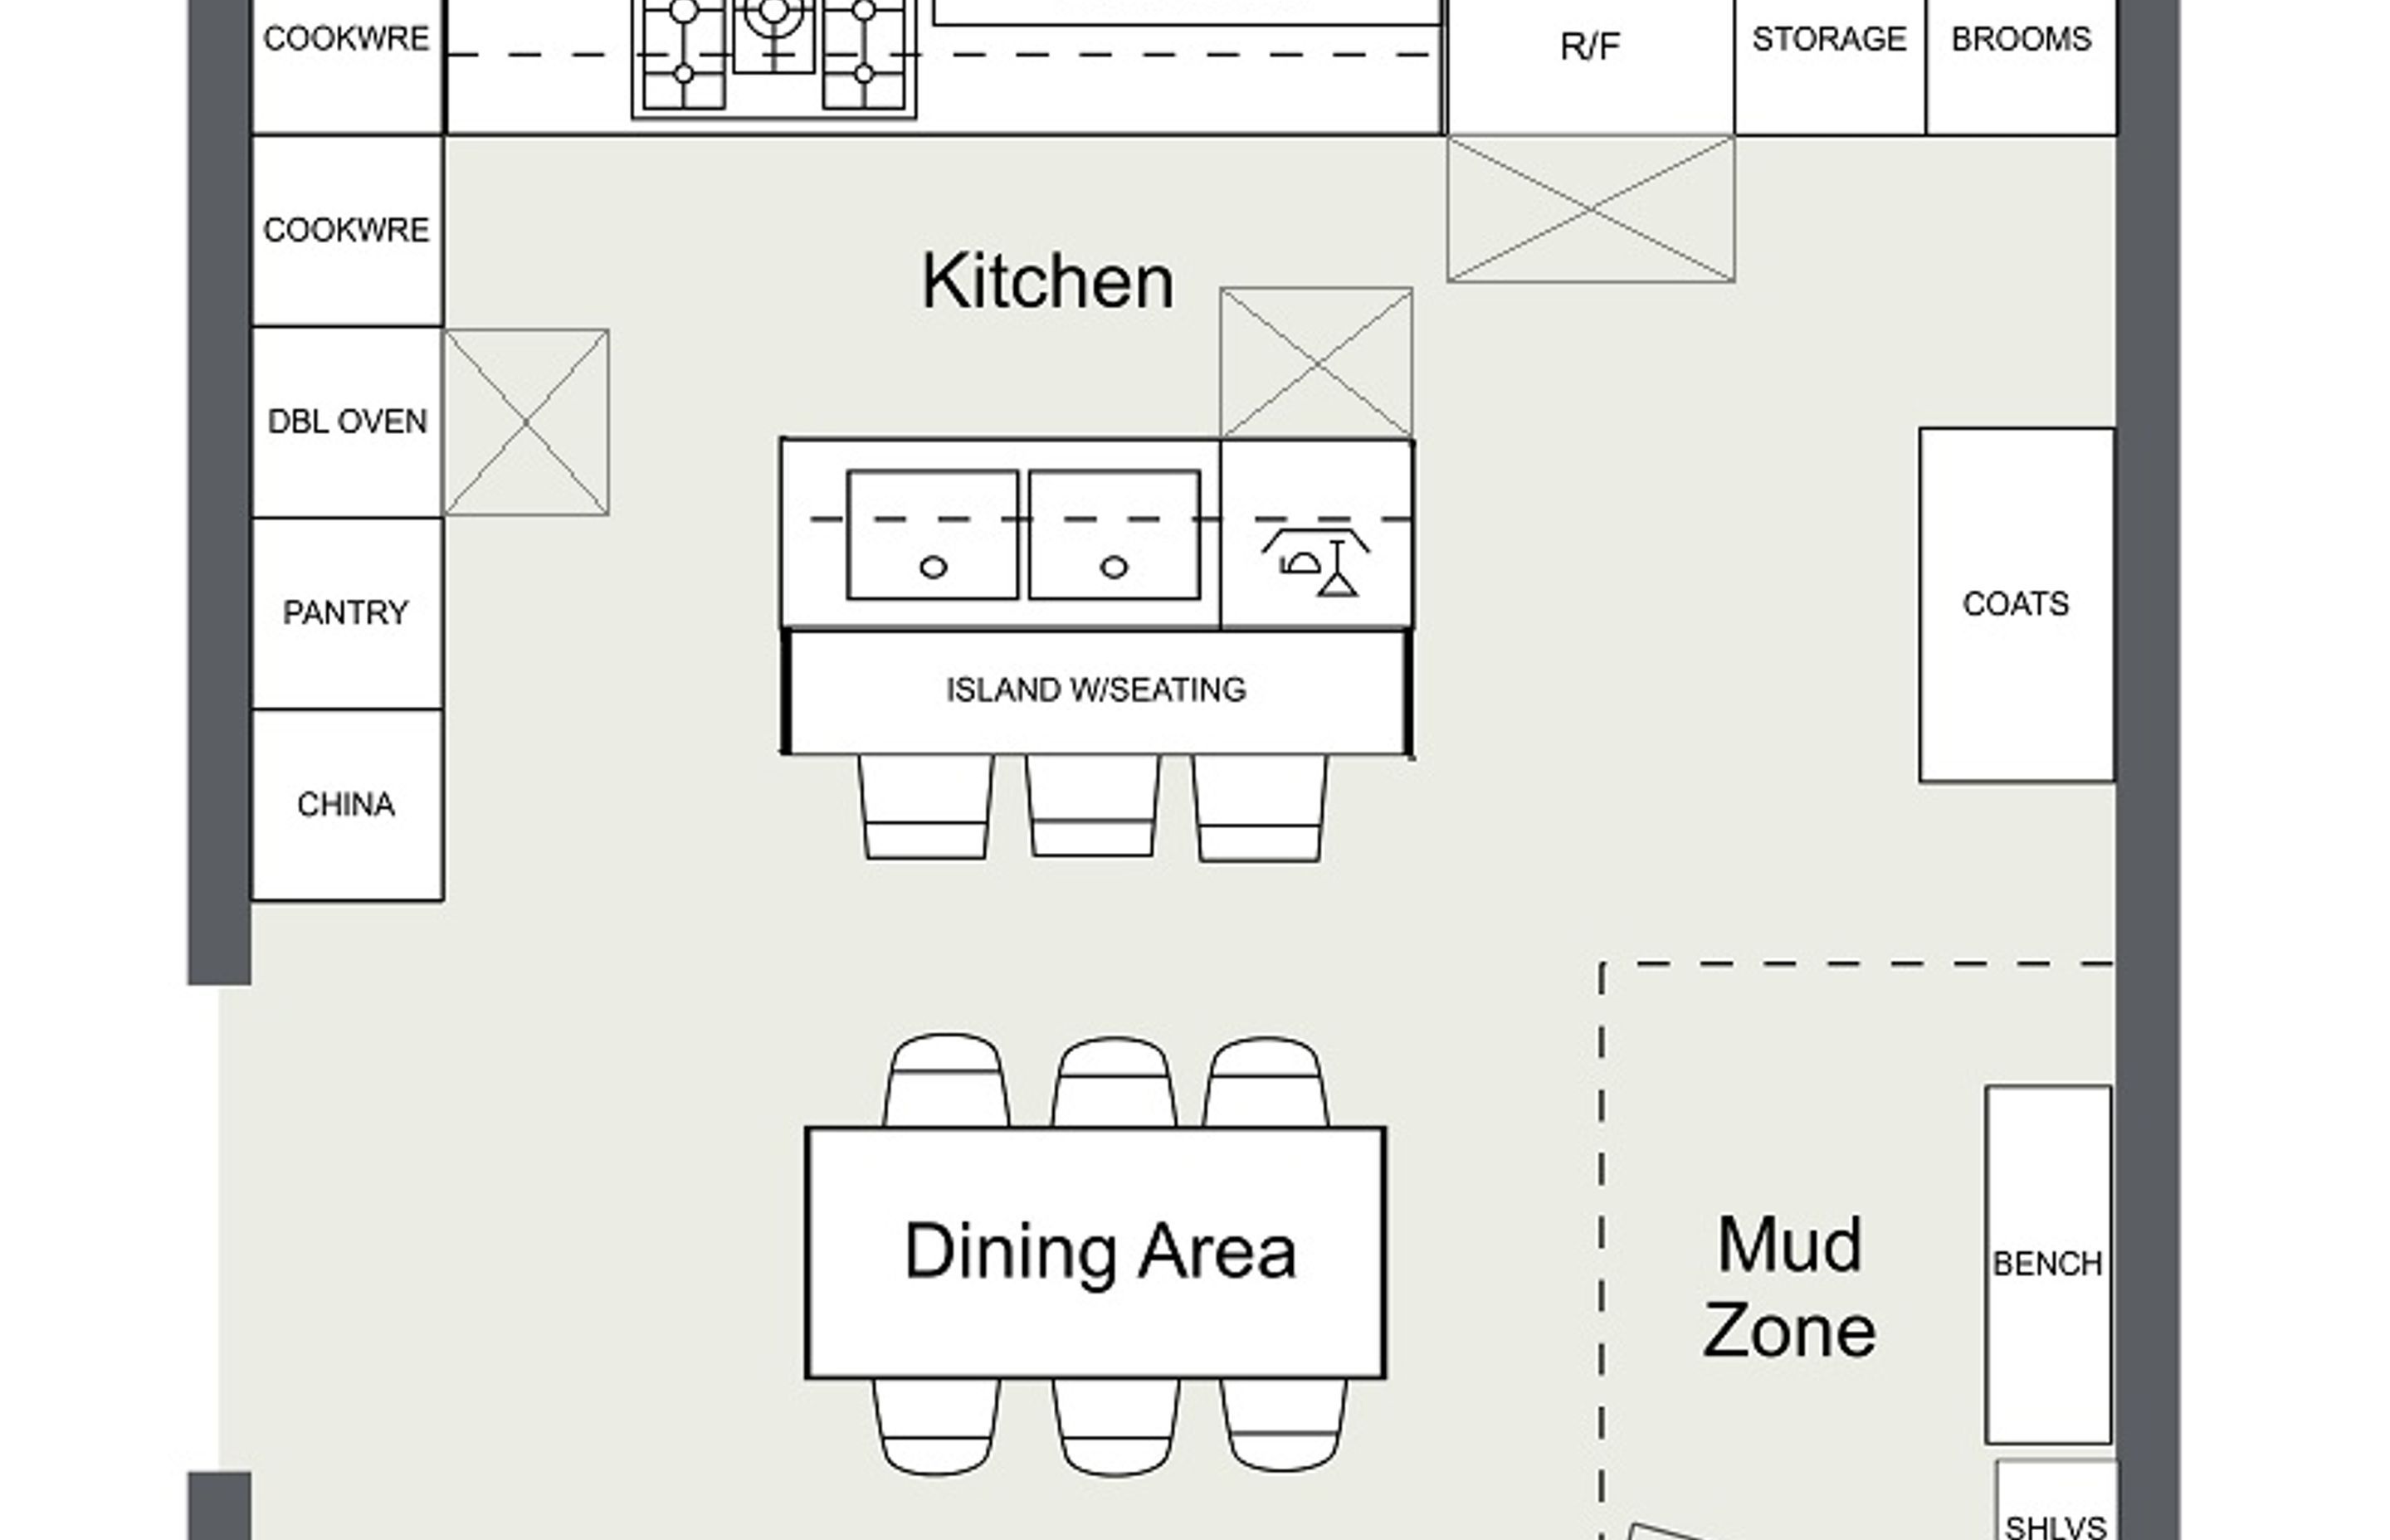 Everything should comfortably open and not obstruct the pathway or any other fixture in a functional kitchen design (Image courtesy Room Sketcher.com: https://www.roomsketcher.com/blog/kitchen-layout-ideas/)